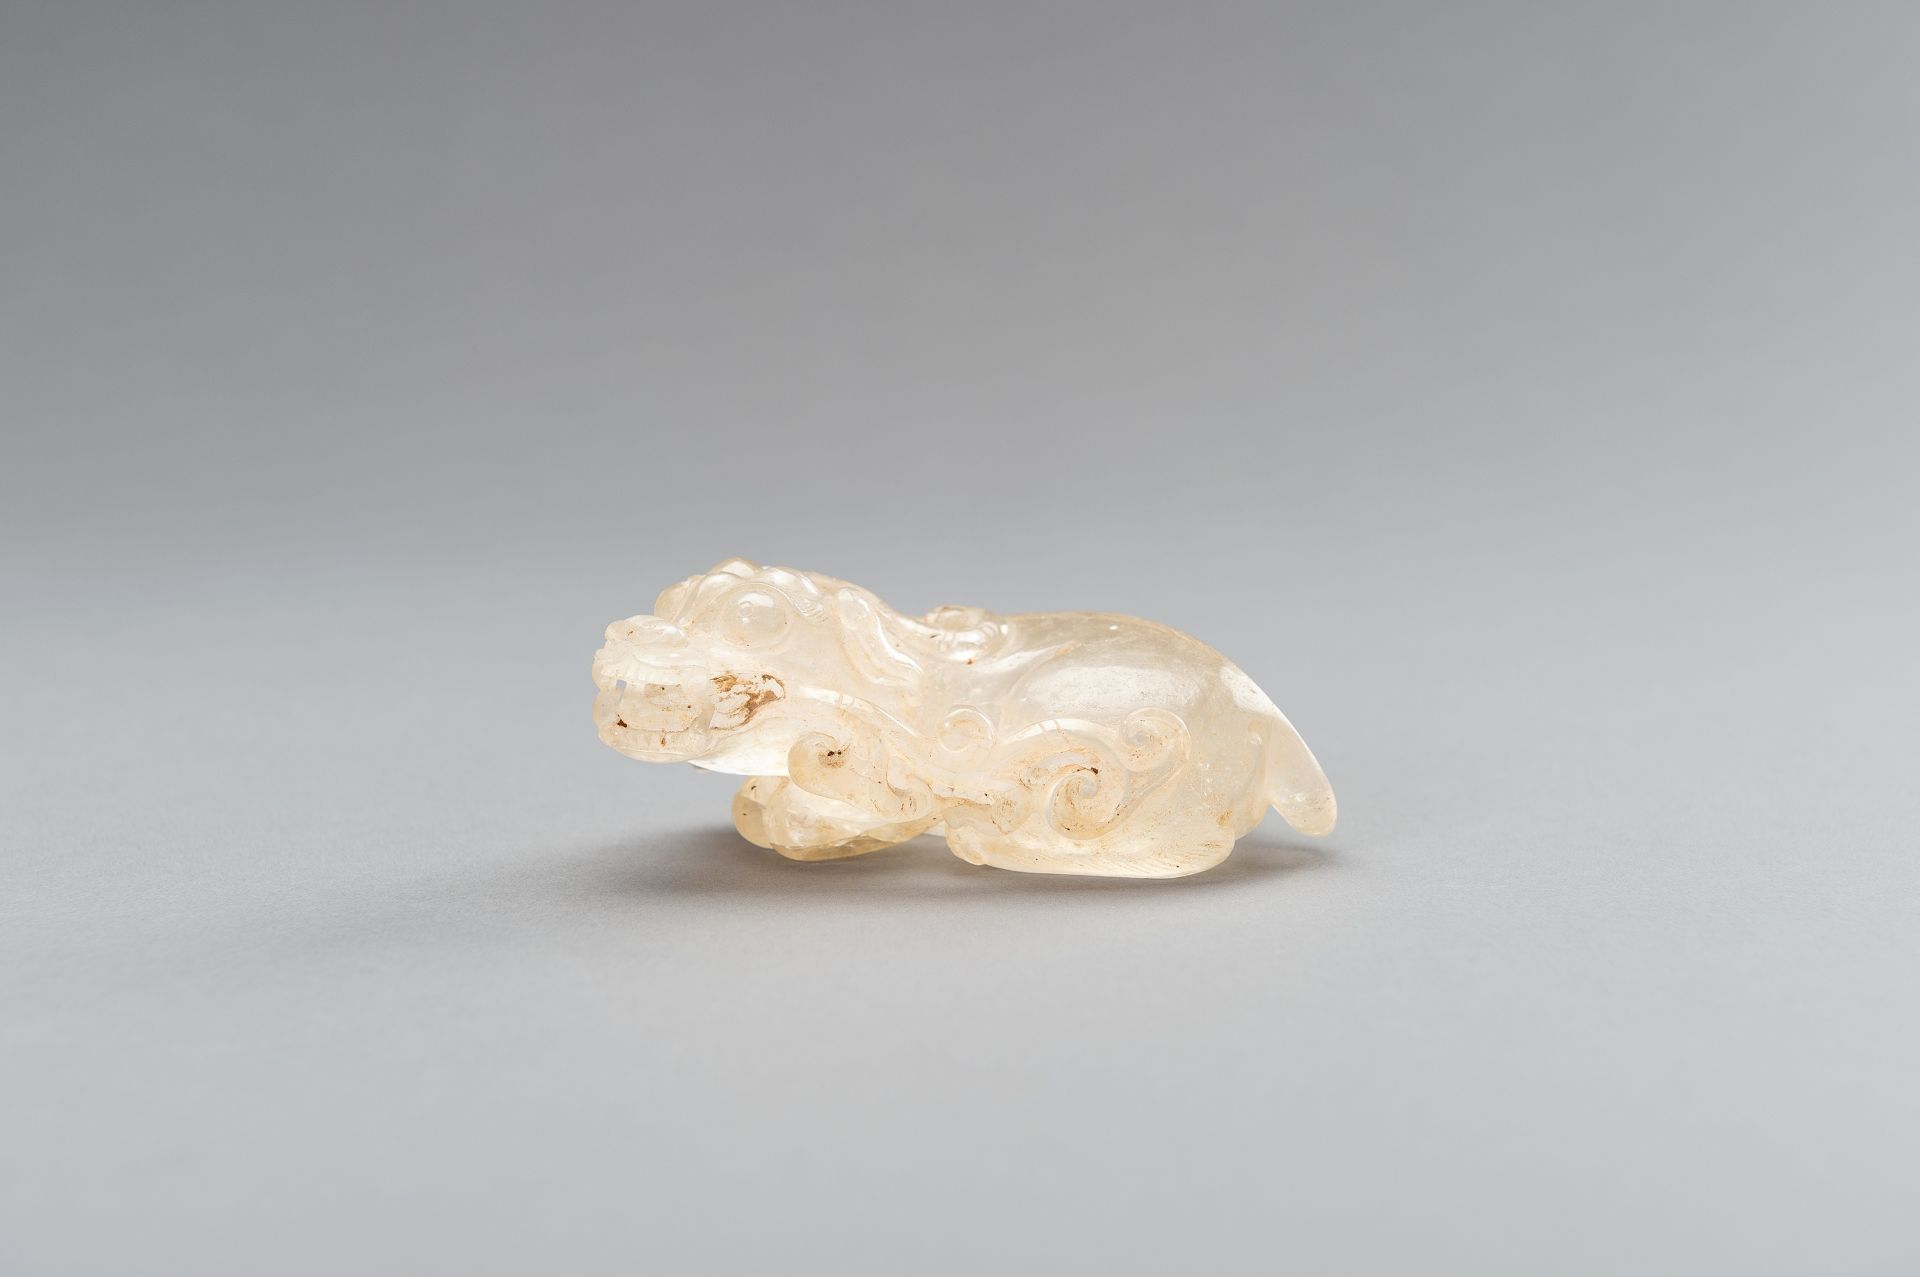 A FINE ROCK CRYSTAL 'BIXIE AND LINGZHI' GROUP, QING DYNASTY